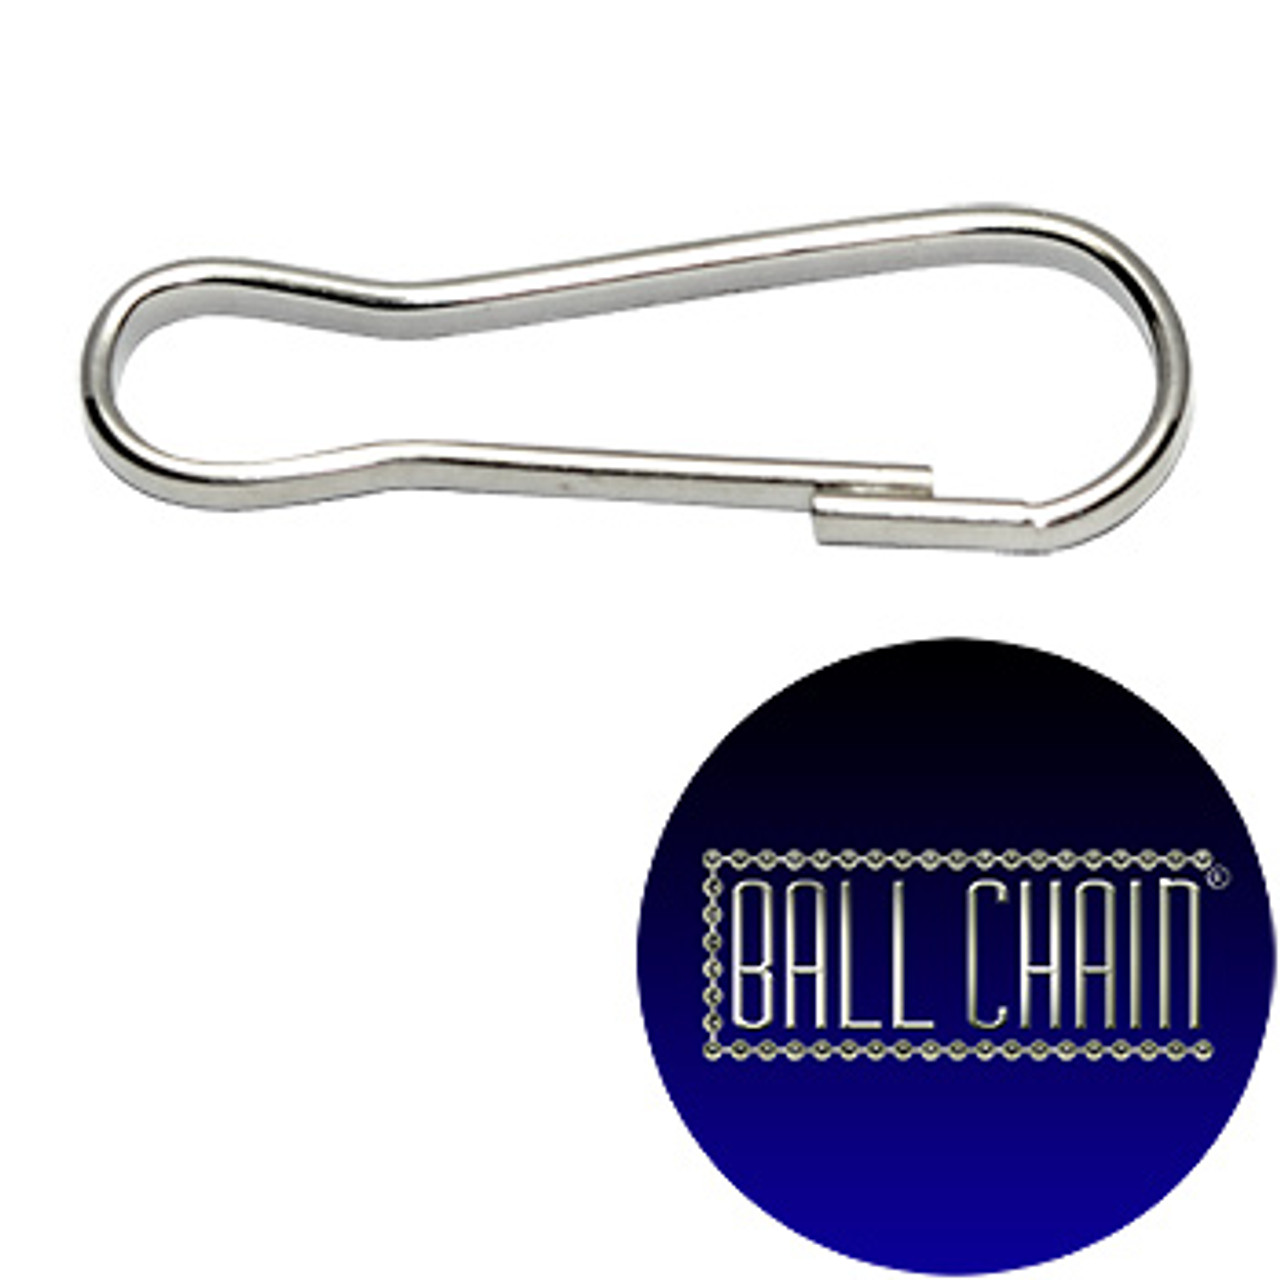 Snap Hooks - 1 Inch Size - Nickel Plated Steel - Ball Chain